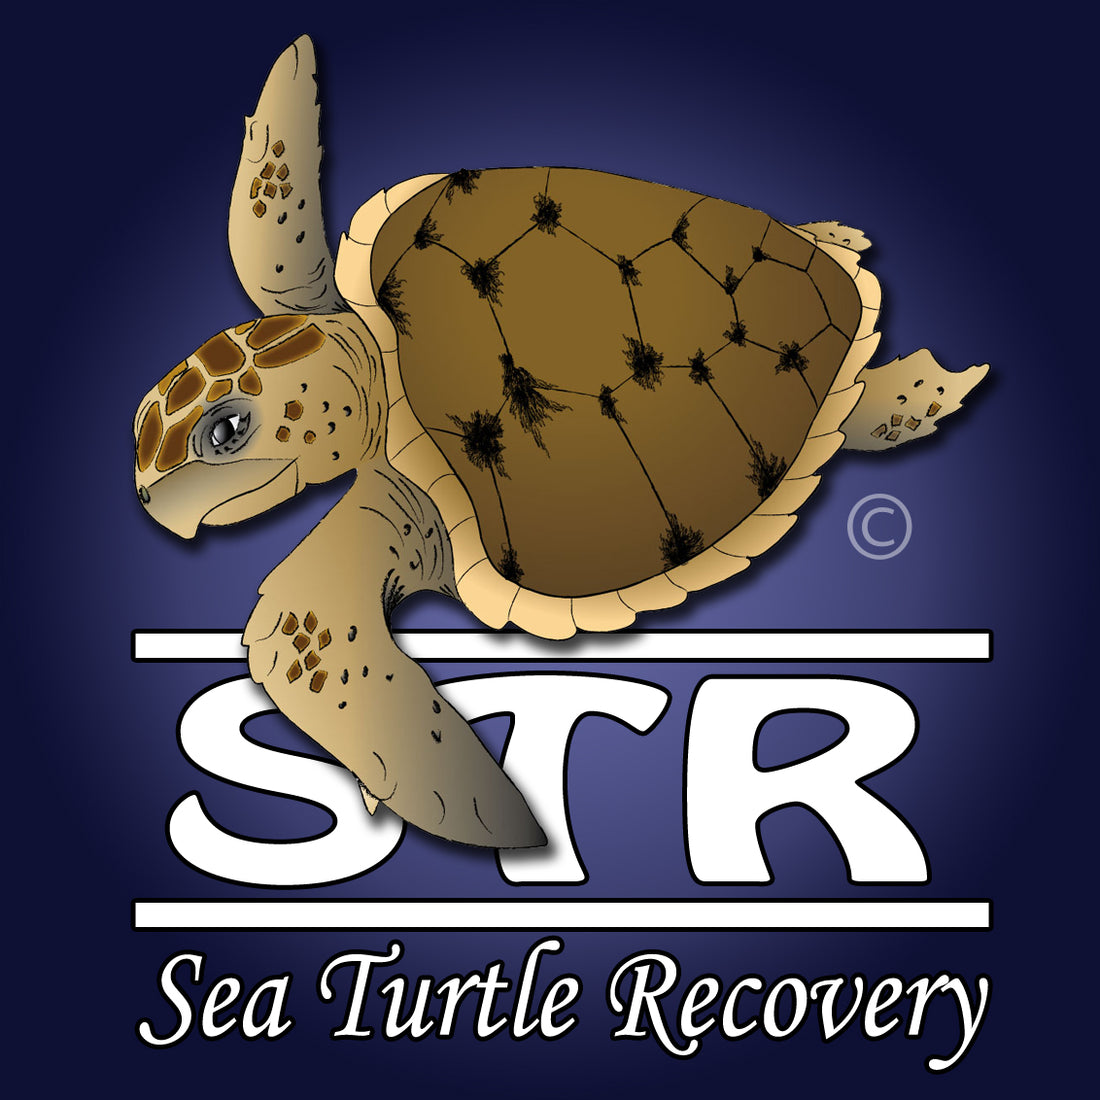 Just by rounding up your order will help us provide a sea turtles the help they need.